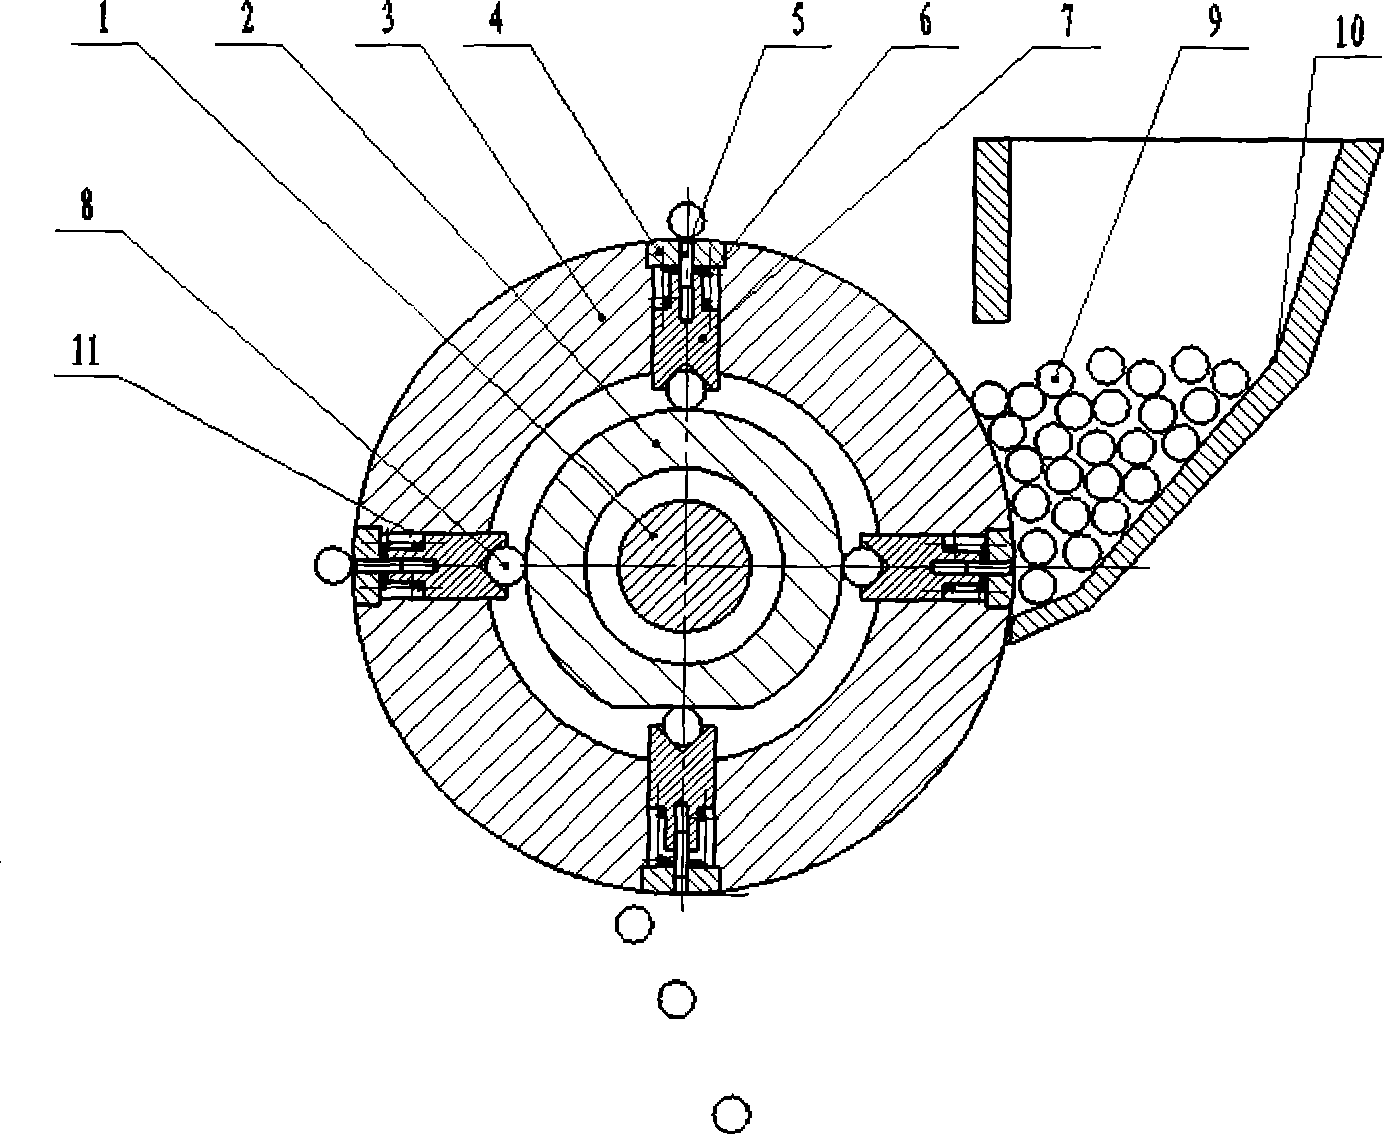 Permanent-magnet magnetic-attraction precision seeding device